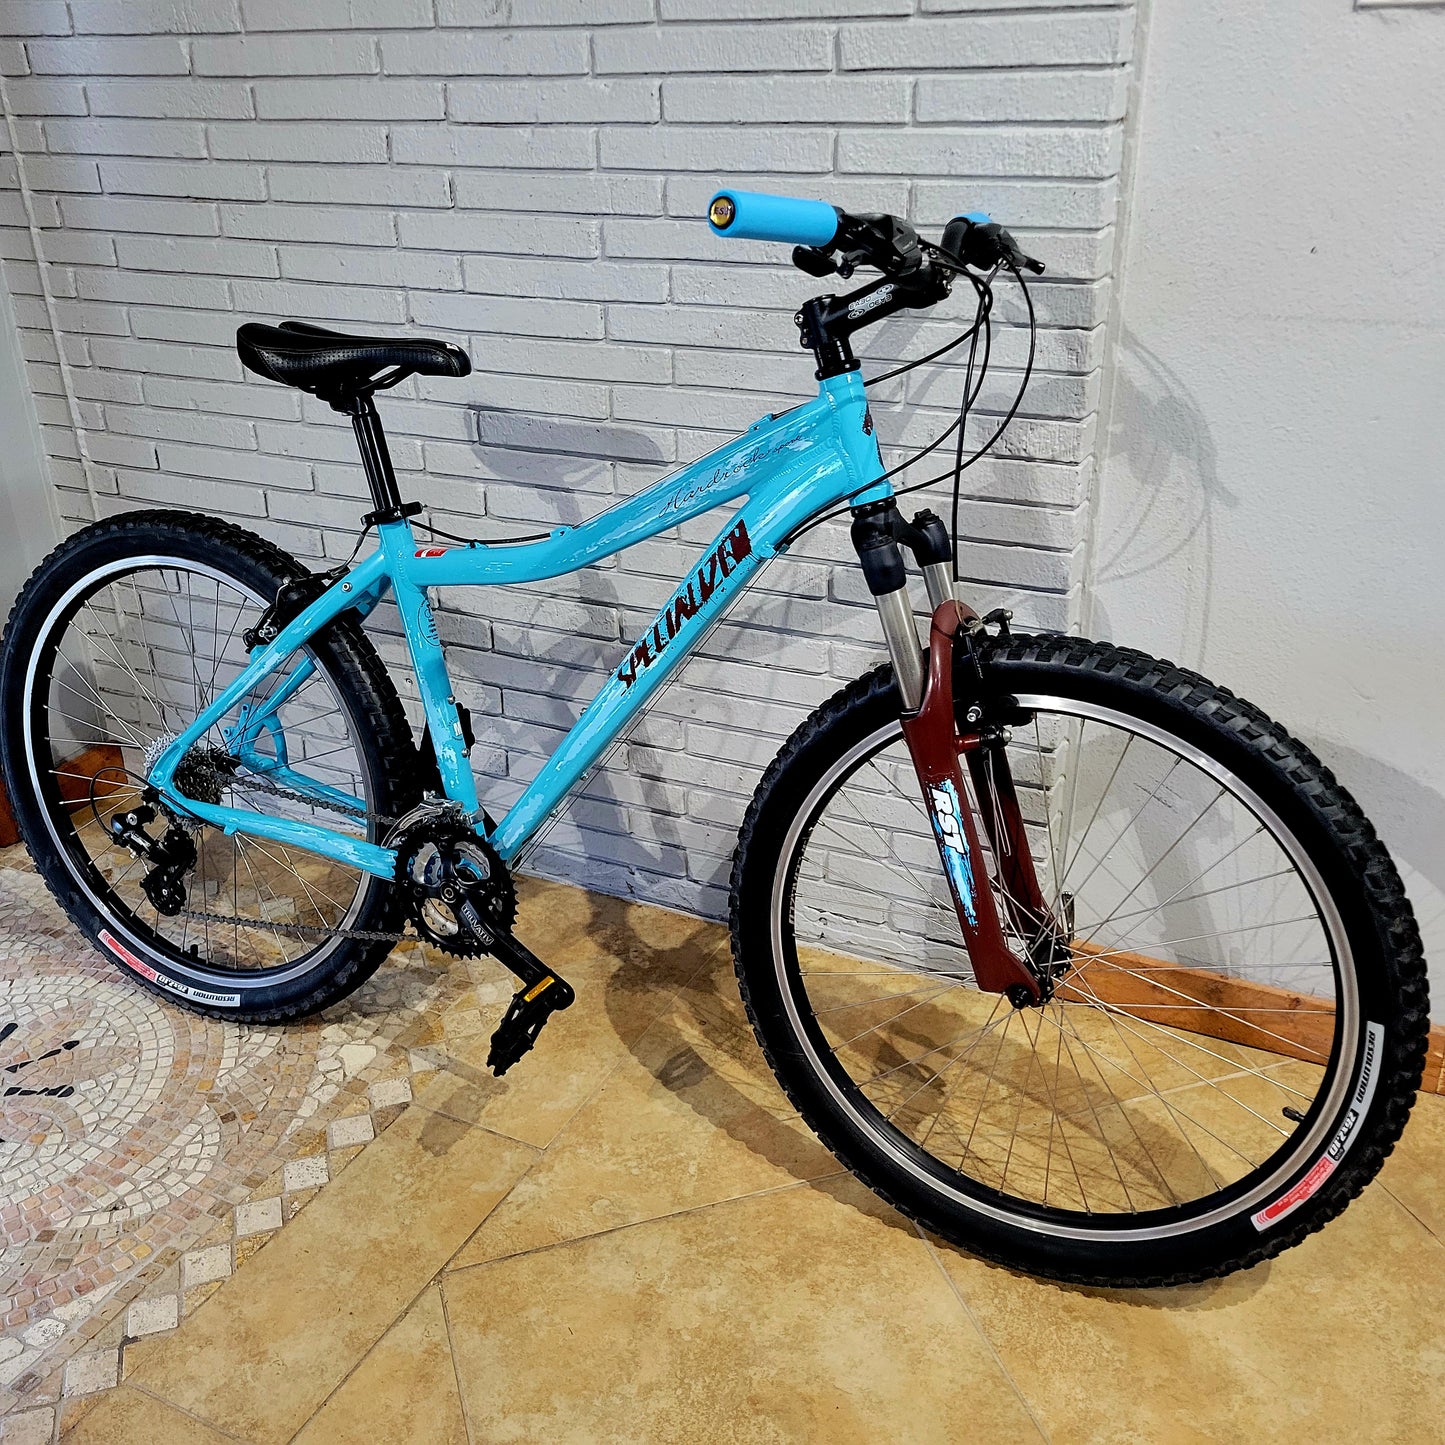 Specialized HardRock 26 (Size Medium) LOCAL PICKUP ONLY, NO SHIPPING